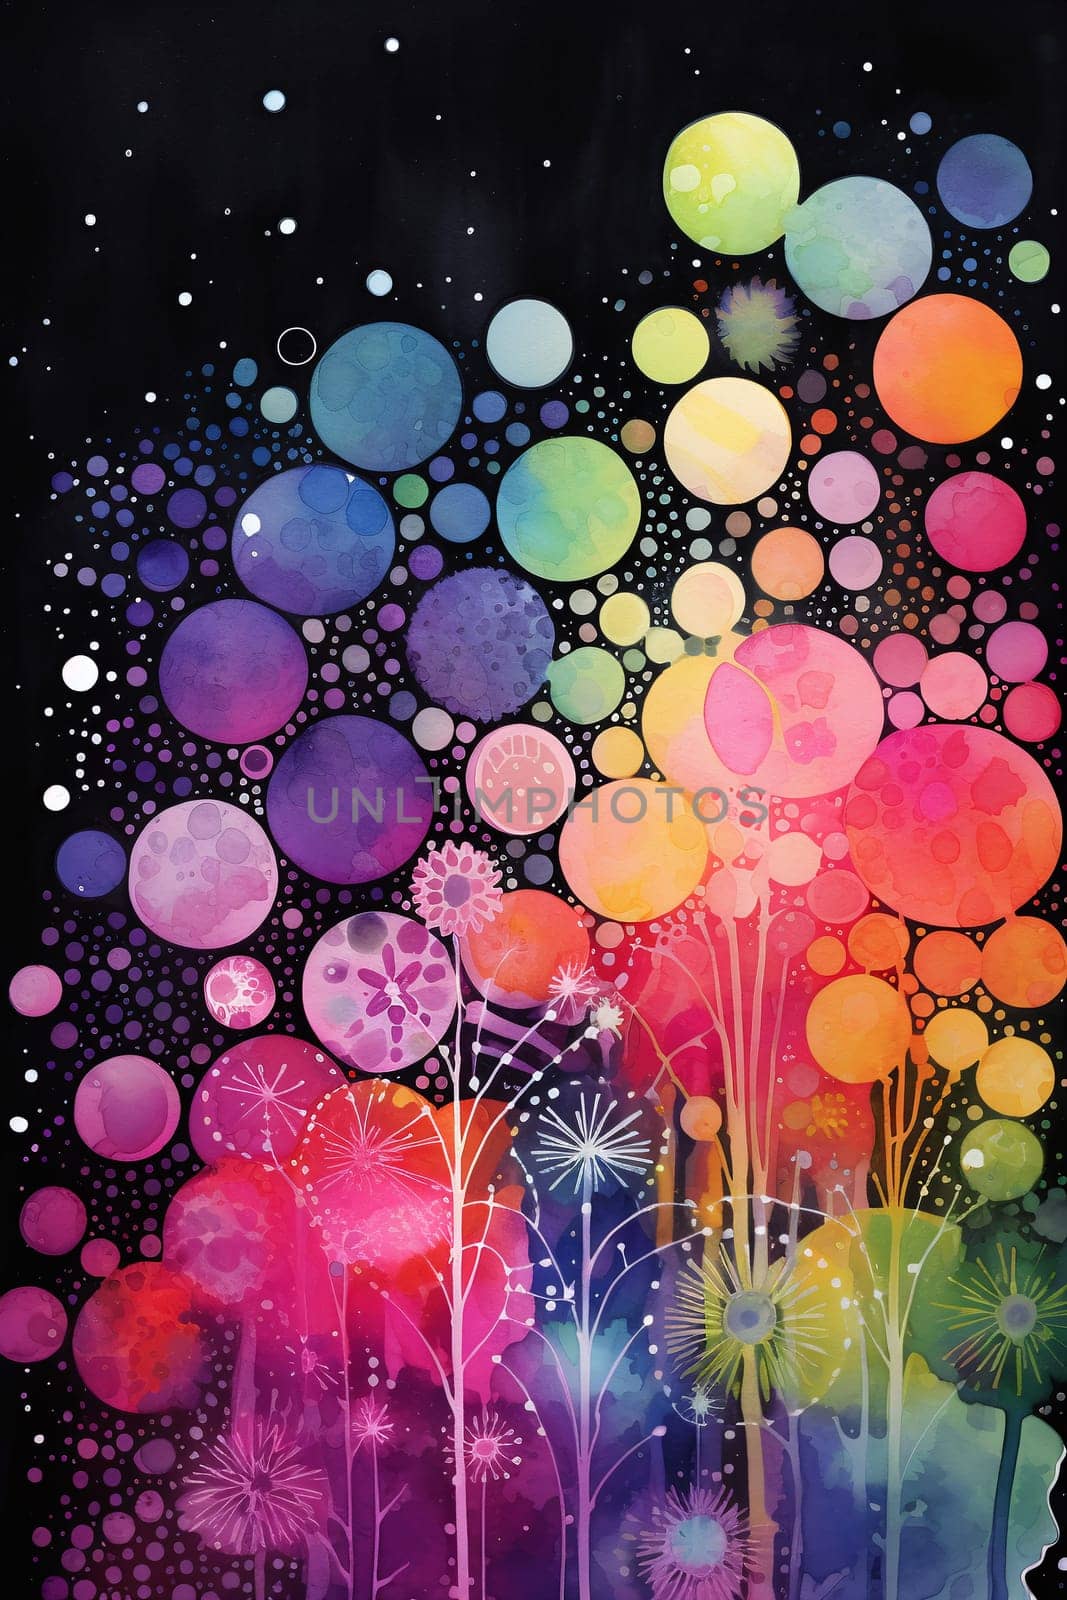 A vivid abstract art piece featuring colorful watercolor bubbles rising above dandelion seeds against a dark backdrop resembling a night sky